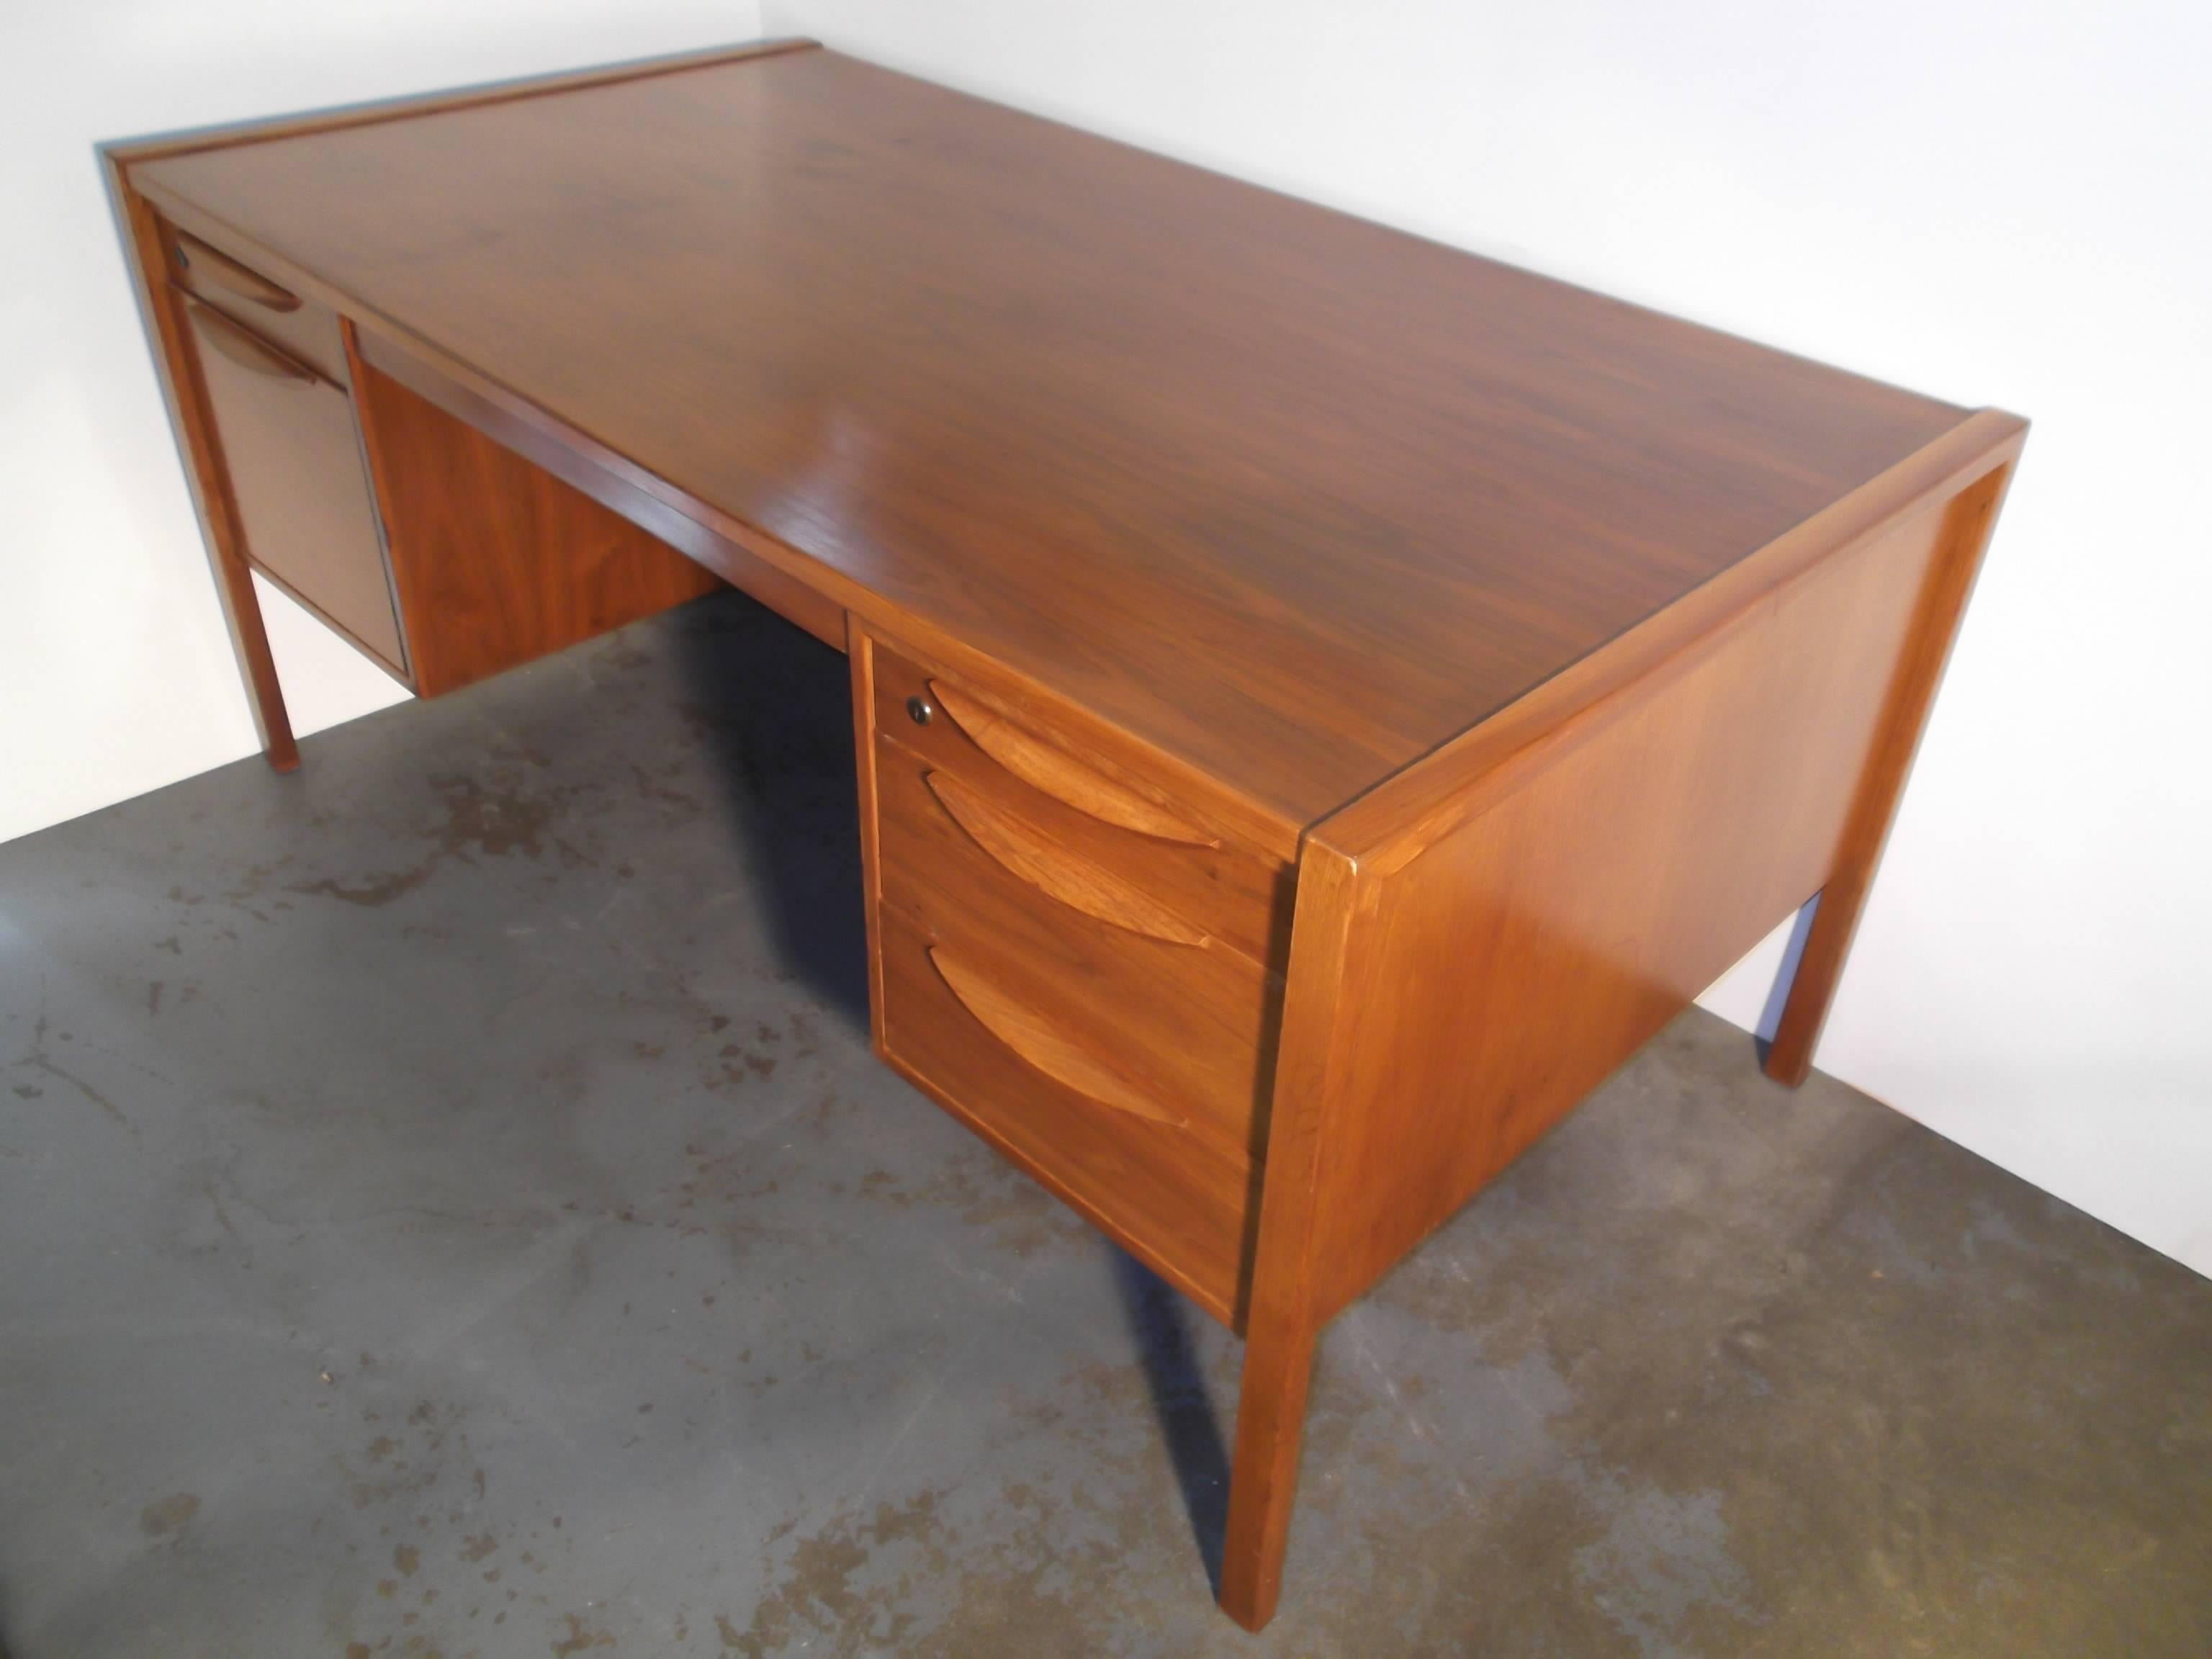 This a nice vintage 1950s desk by Jens Risom. It is in walnut with a nice grain to top especially. It features six drawers with loads of storage, one filing drawer. The drawers are lined in white contrasting formica and feature eyelash pulls in